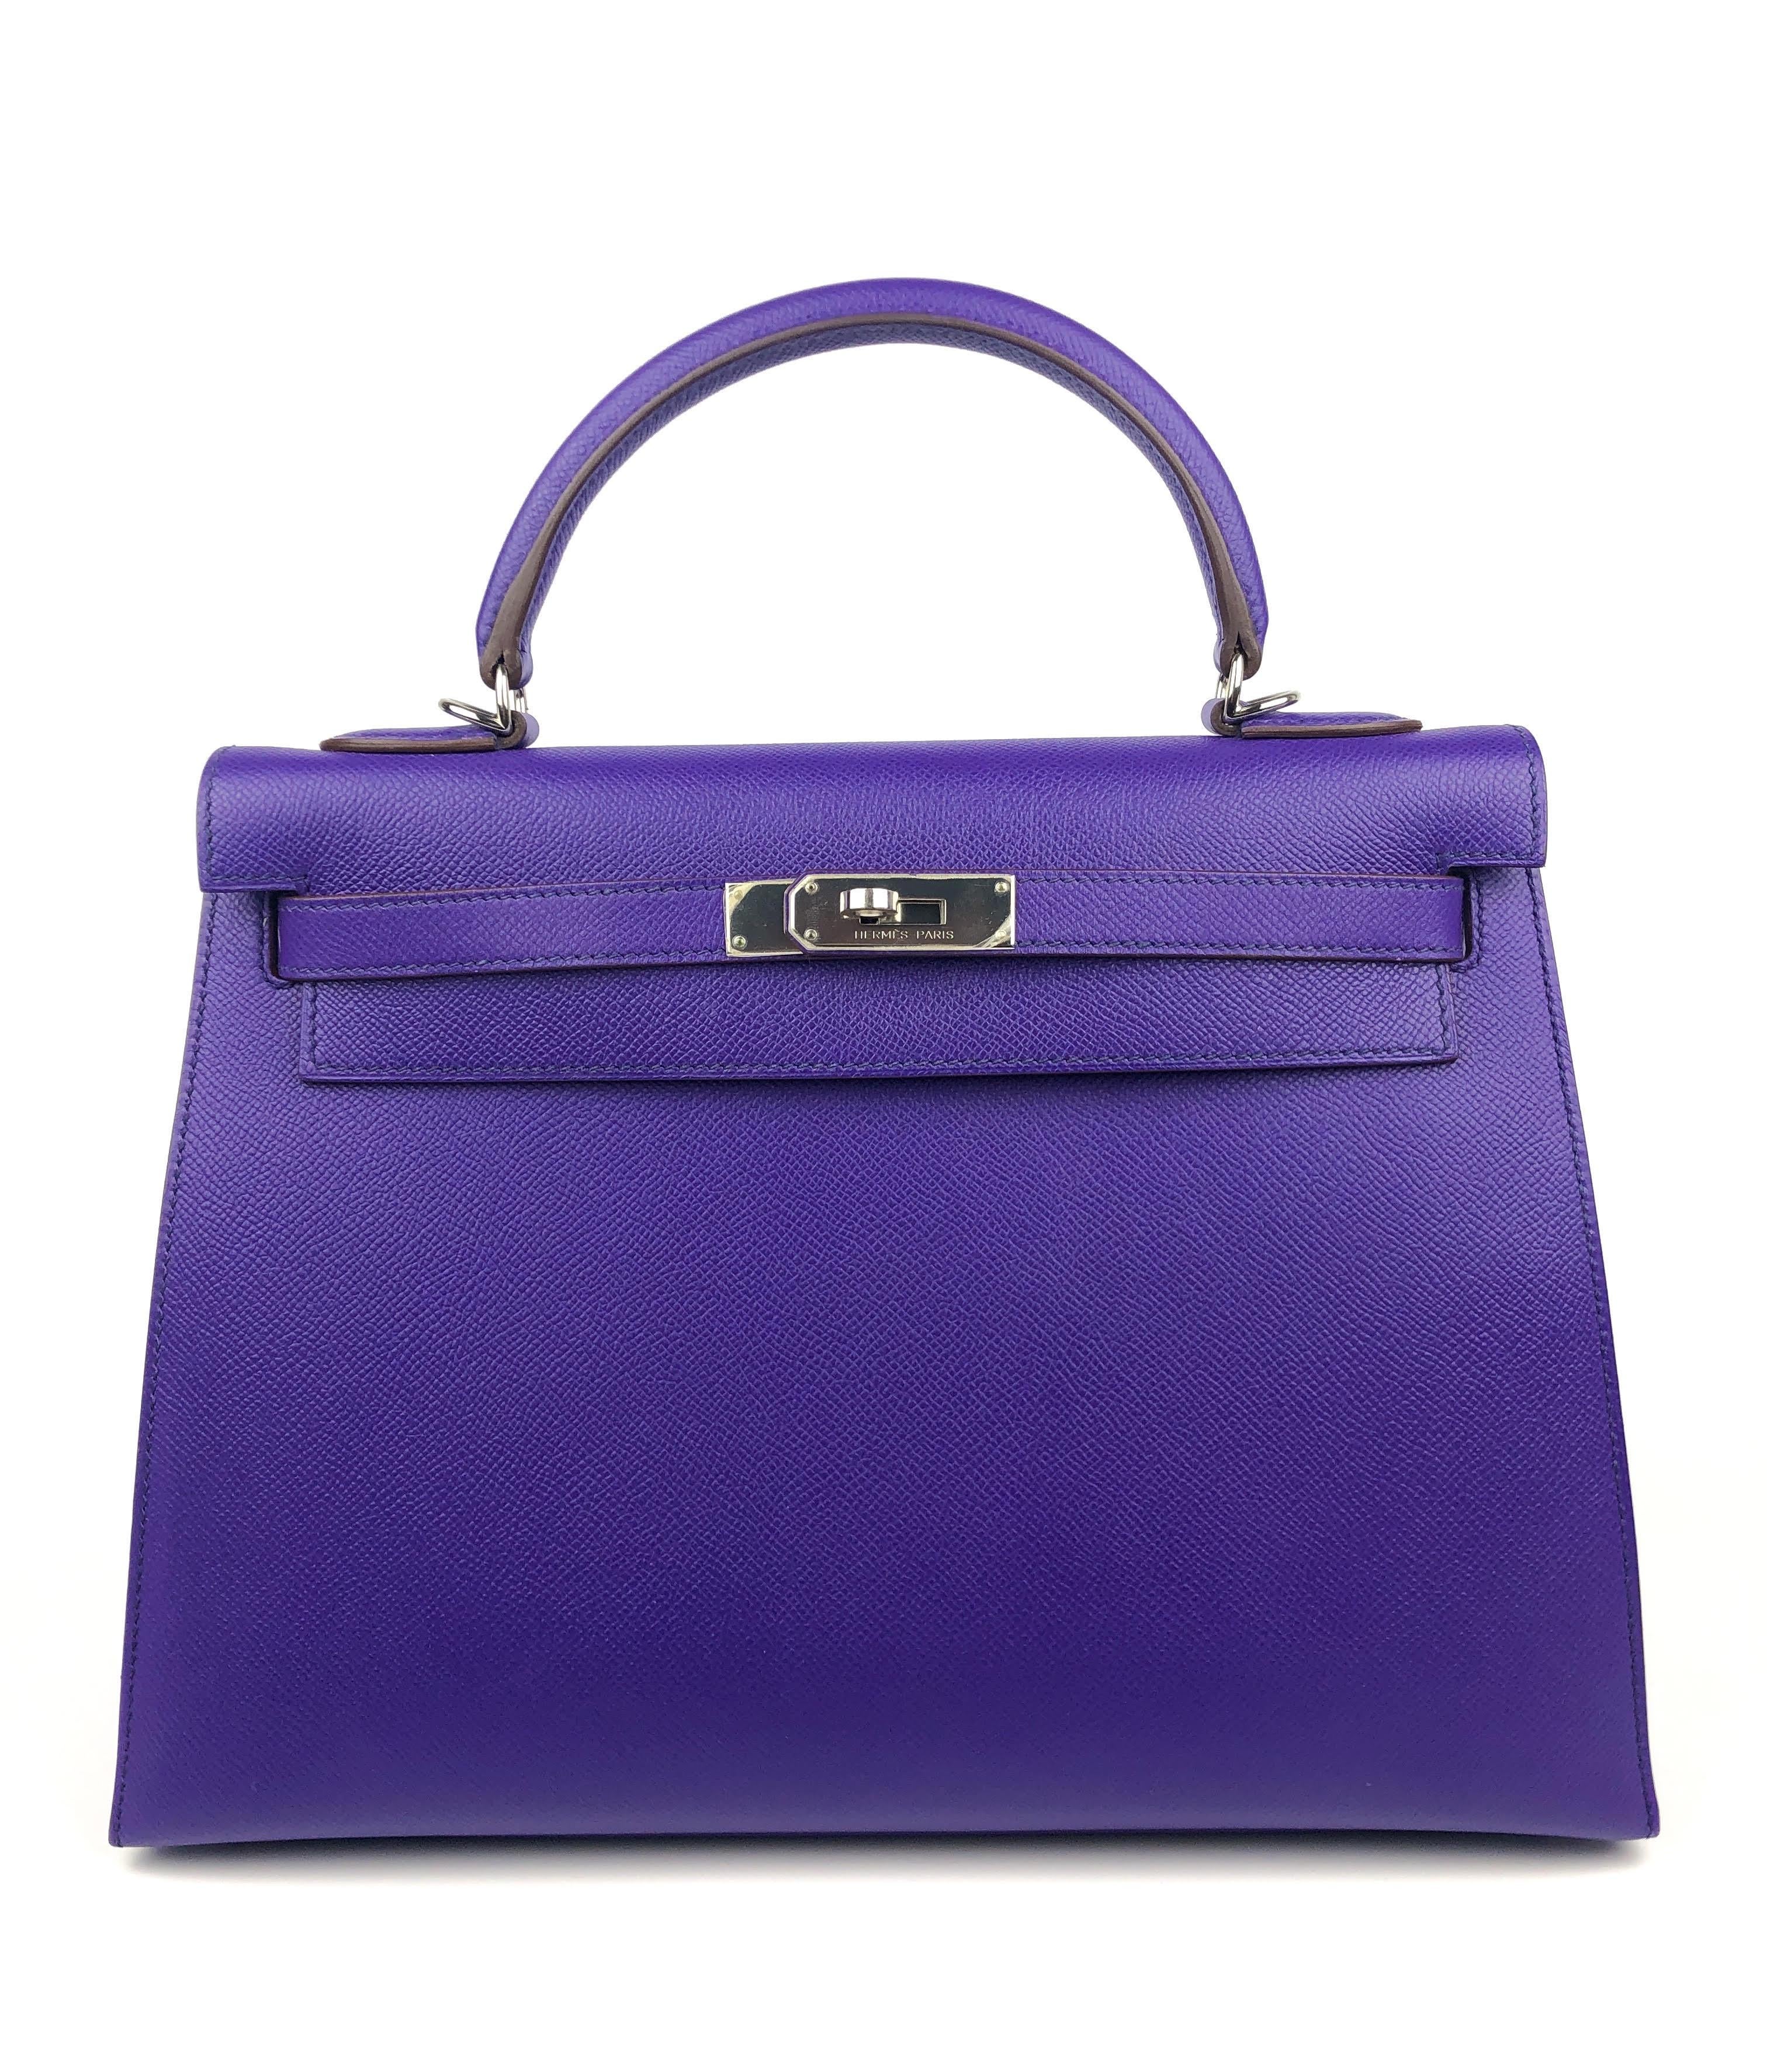 This authentic Hermès Violet Epsom 32 cm Kelly Sellier is in pristine condition with the protective plastic intact on the hardware.     Hermès bags are considered the ultimate luxury item worldwide.  Each piece is hand sewn with waitlists that can